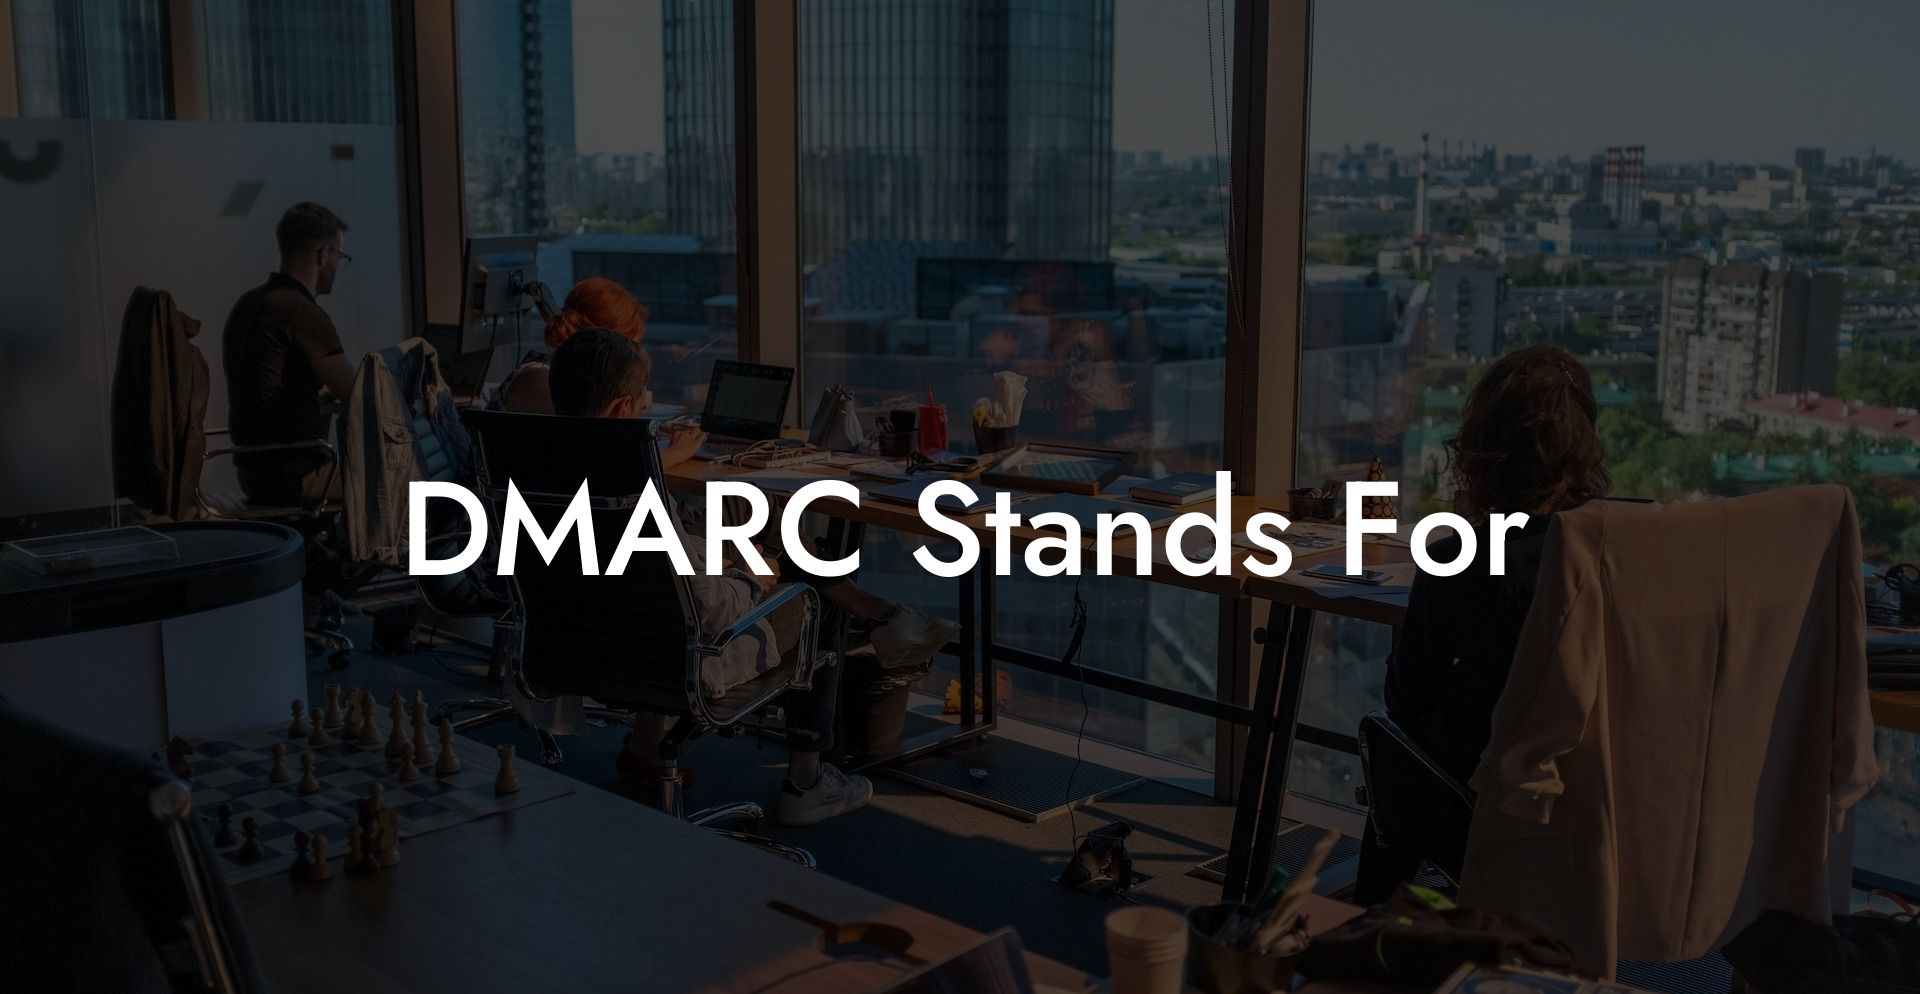 DMARC Stands For